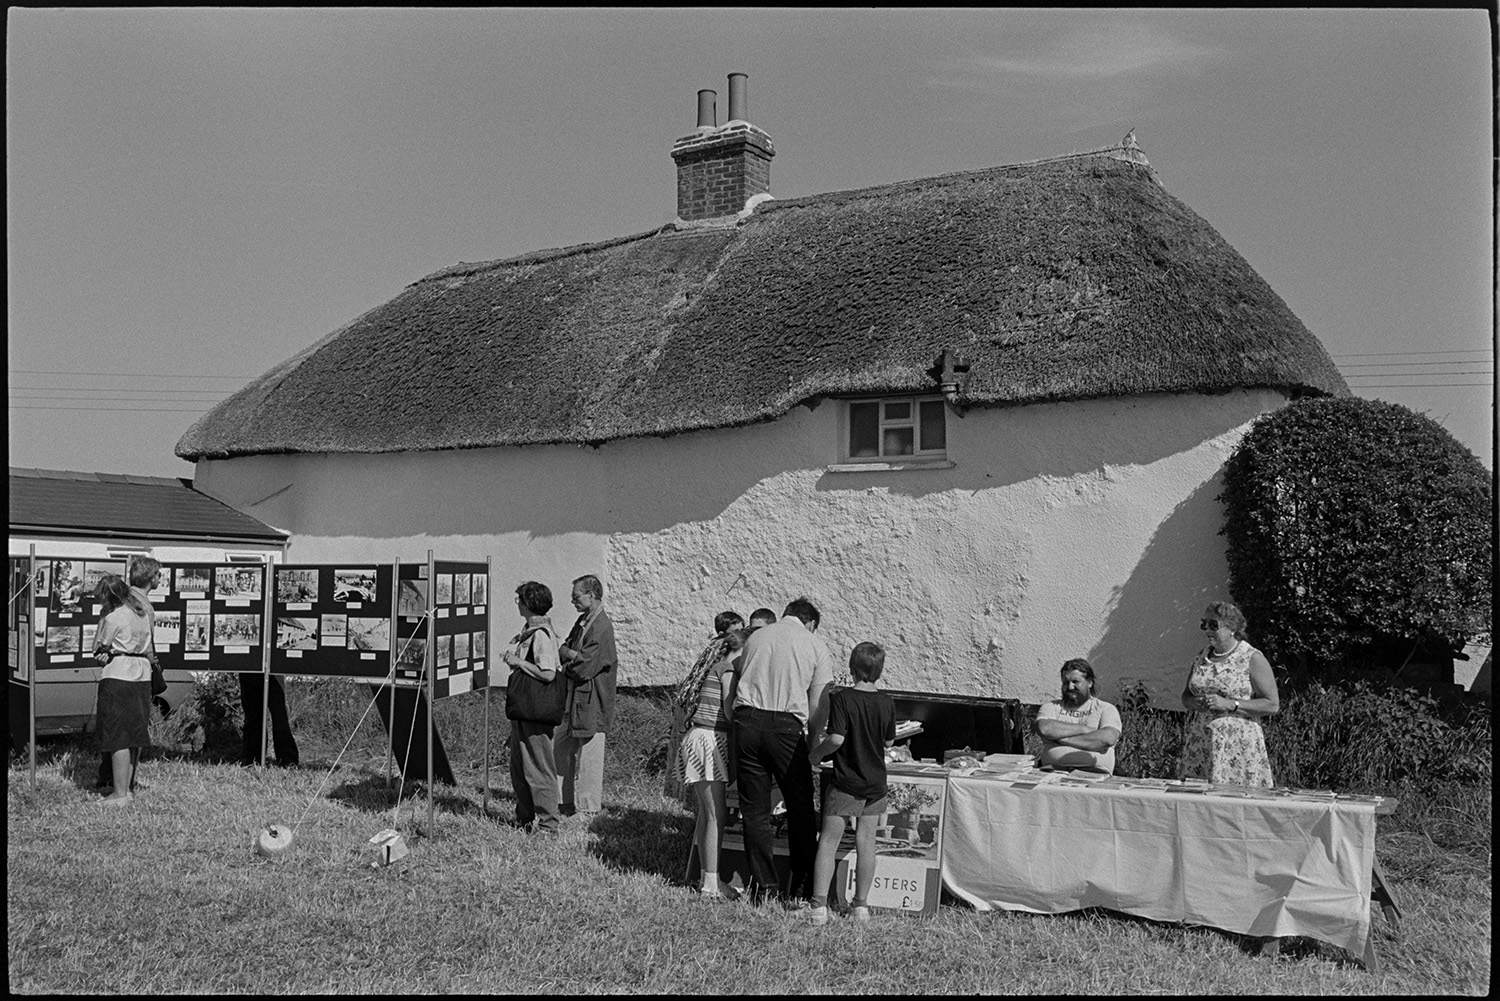 Country fair, majorettes, cups on display, stalls.
[Visitors looking at display boards showing a range of photographs from the Beaford Archive, and a stall selling posters, at Ashreigney Country Fair. They are in front of a whitewashed and thatched cottage.]